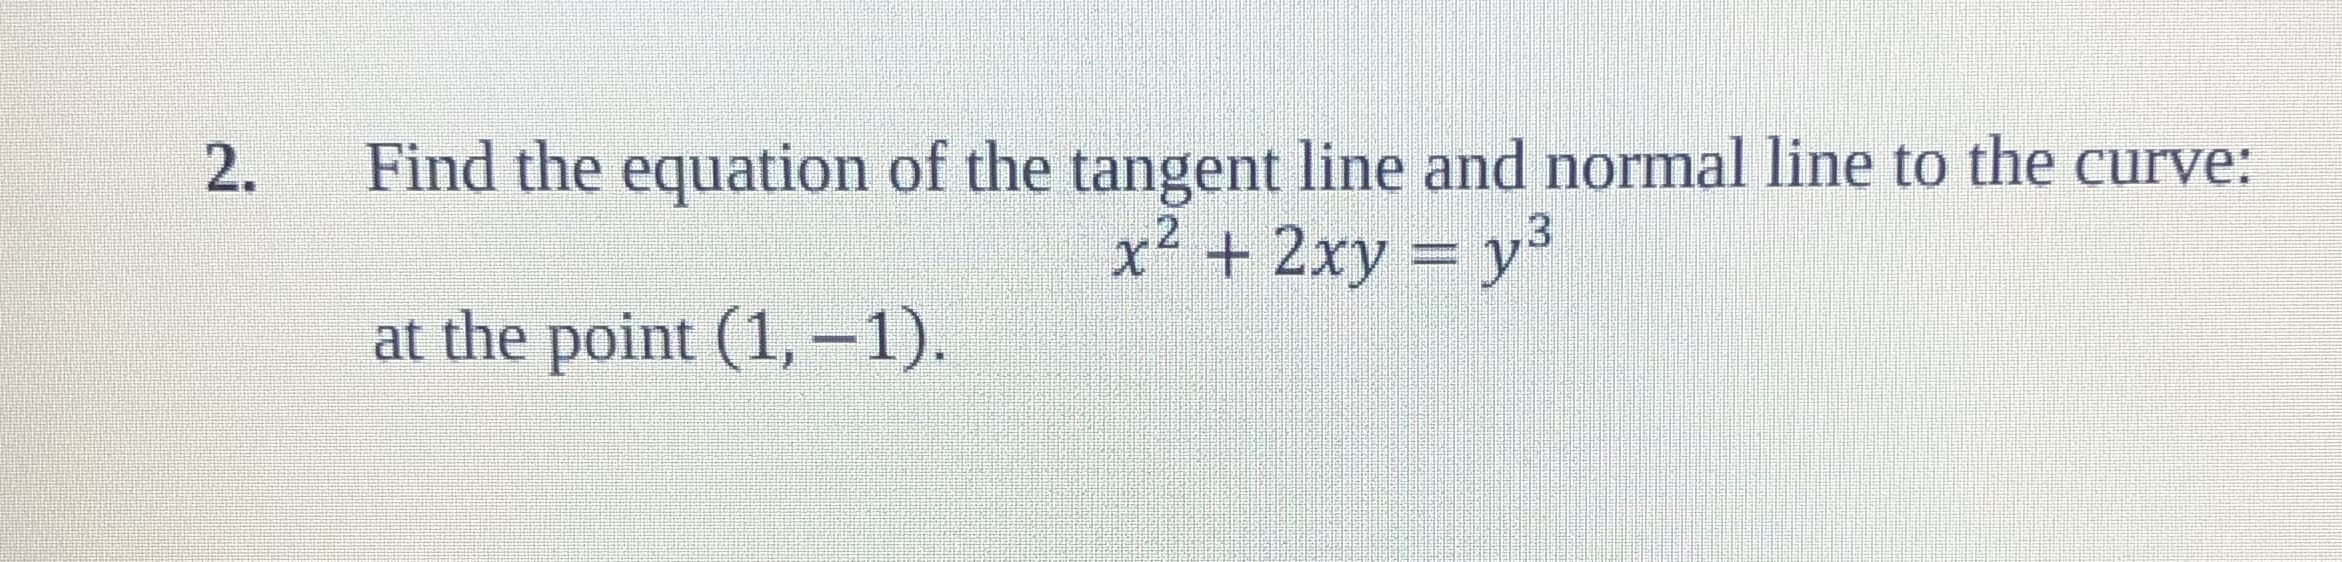 Find the equation of the tangent line and normal line to the curve:
2.
x2 + 2xy = y3
at the point (1,-1)
